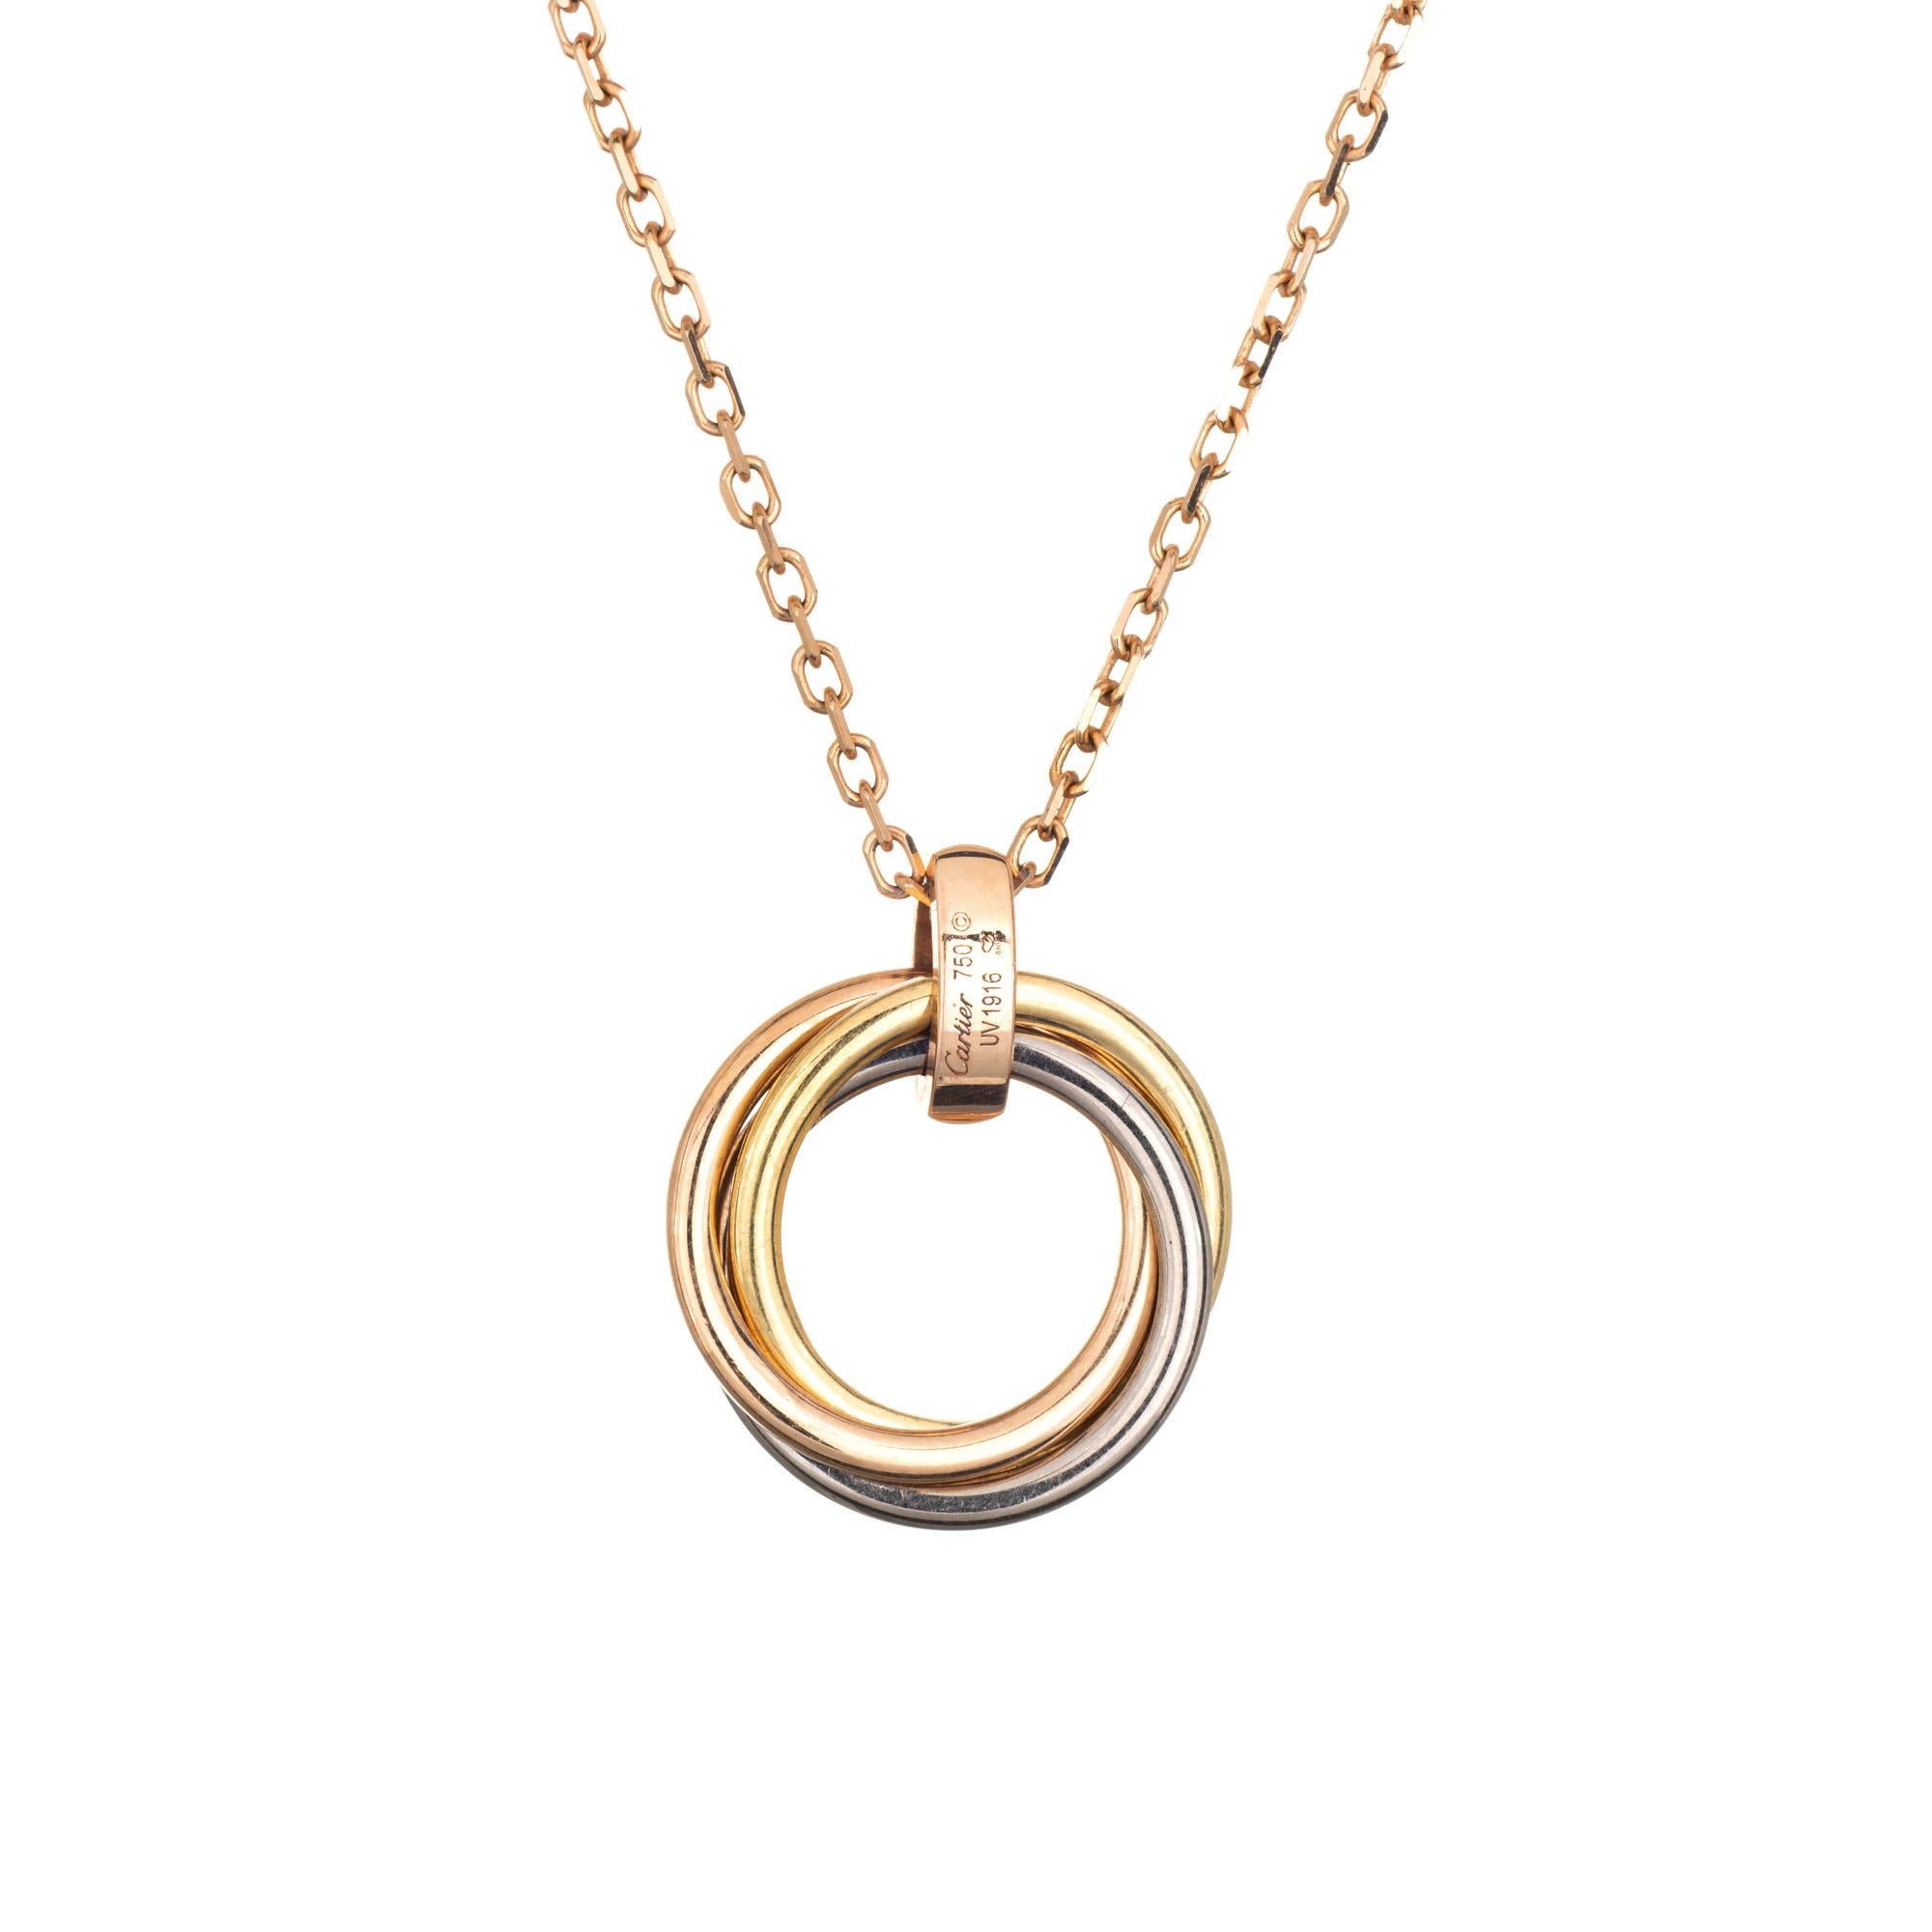 Pre-owned Cartier Trinity necklace crafted in 18k yellow, white & rose gold.  

The Cartier necklace features bands of 18k rose, yellow & white gold with a diamond set bale. Each band measures 1.8mm wide. The necklace is great worn alone or layered